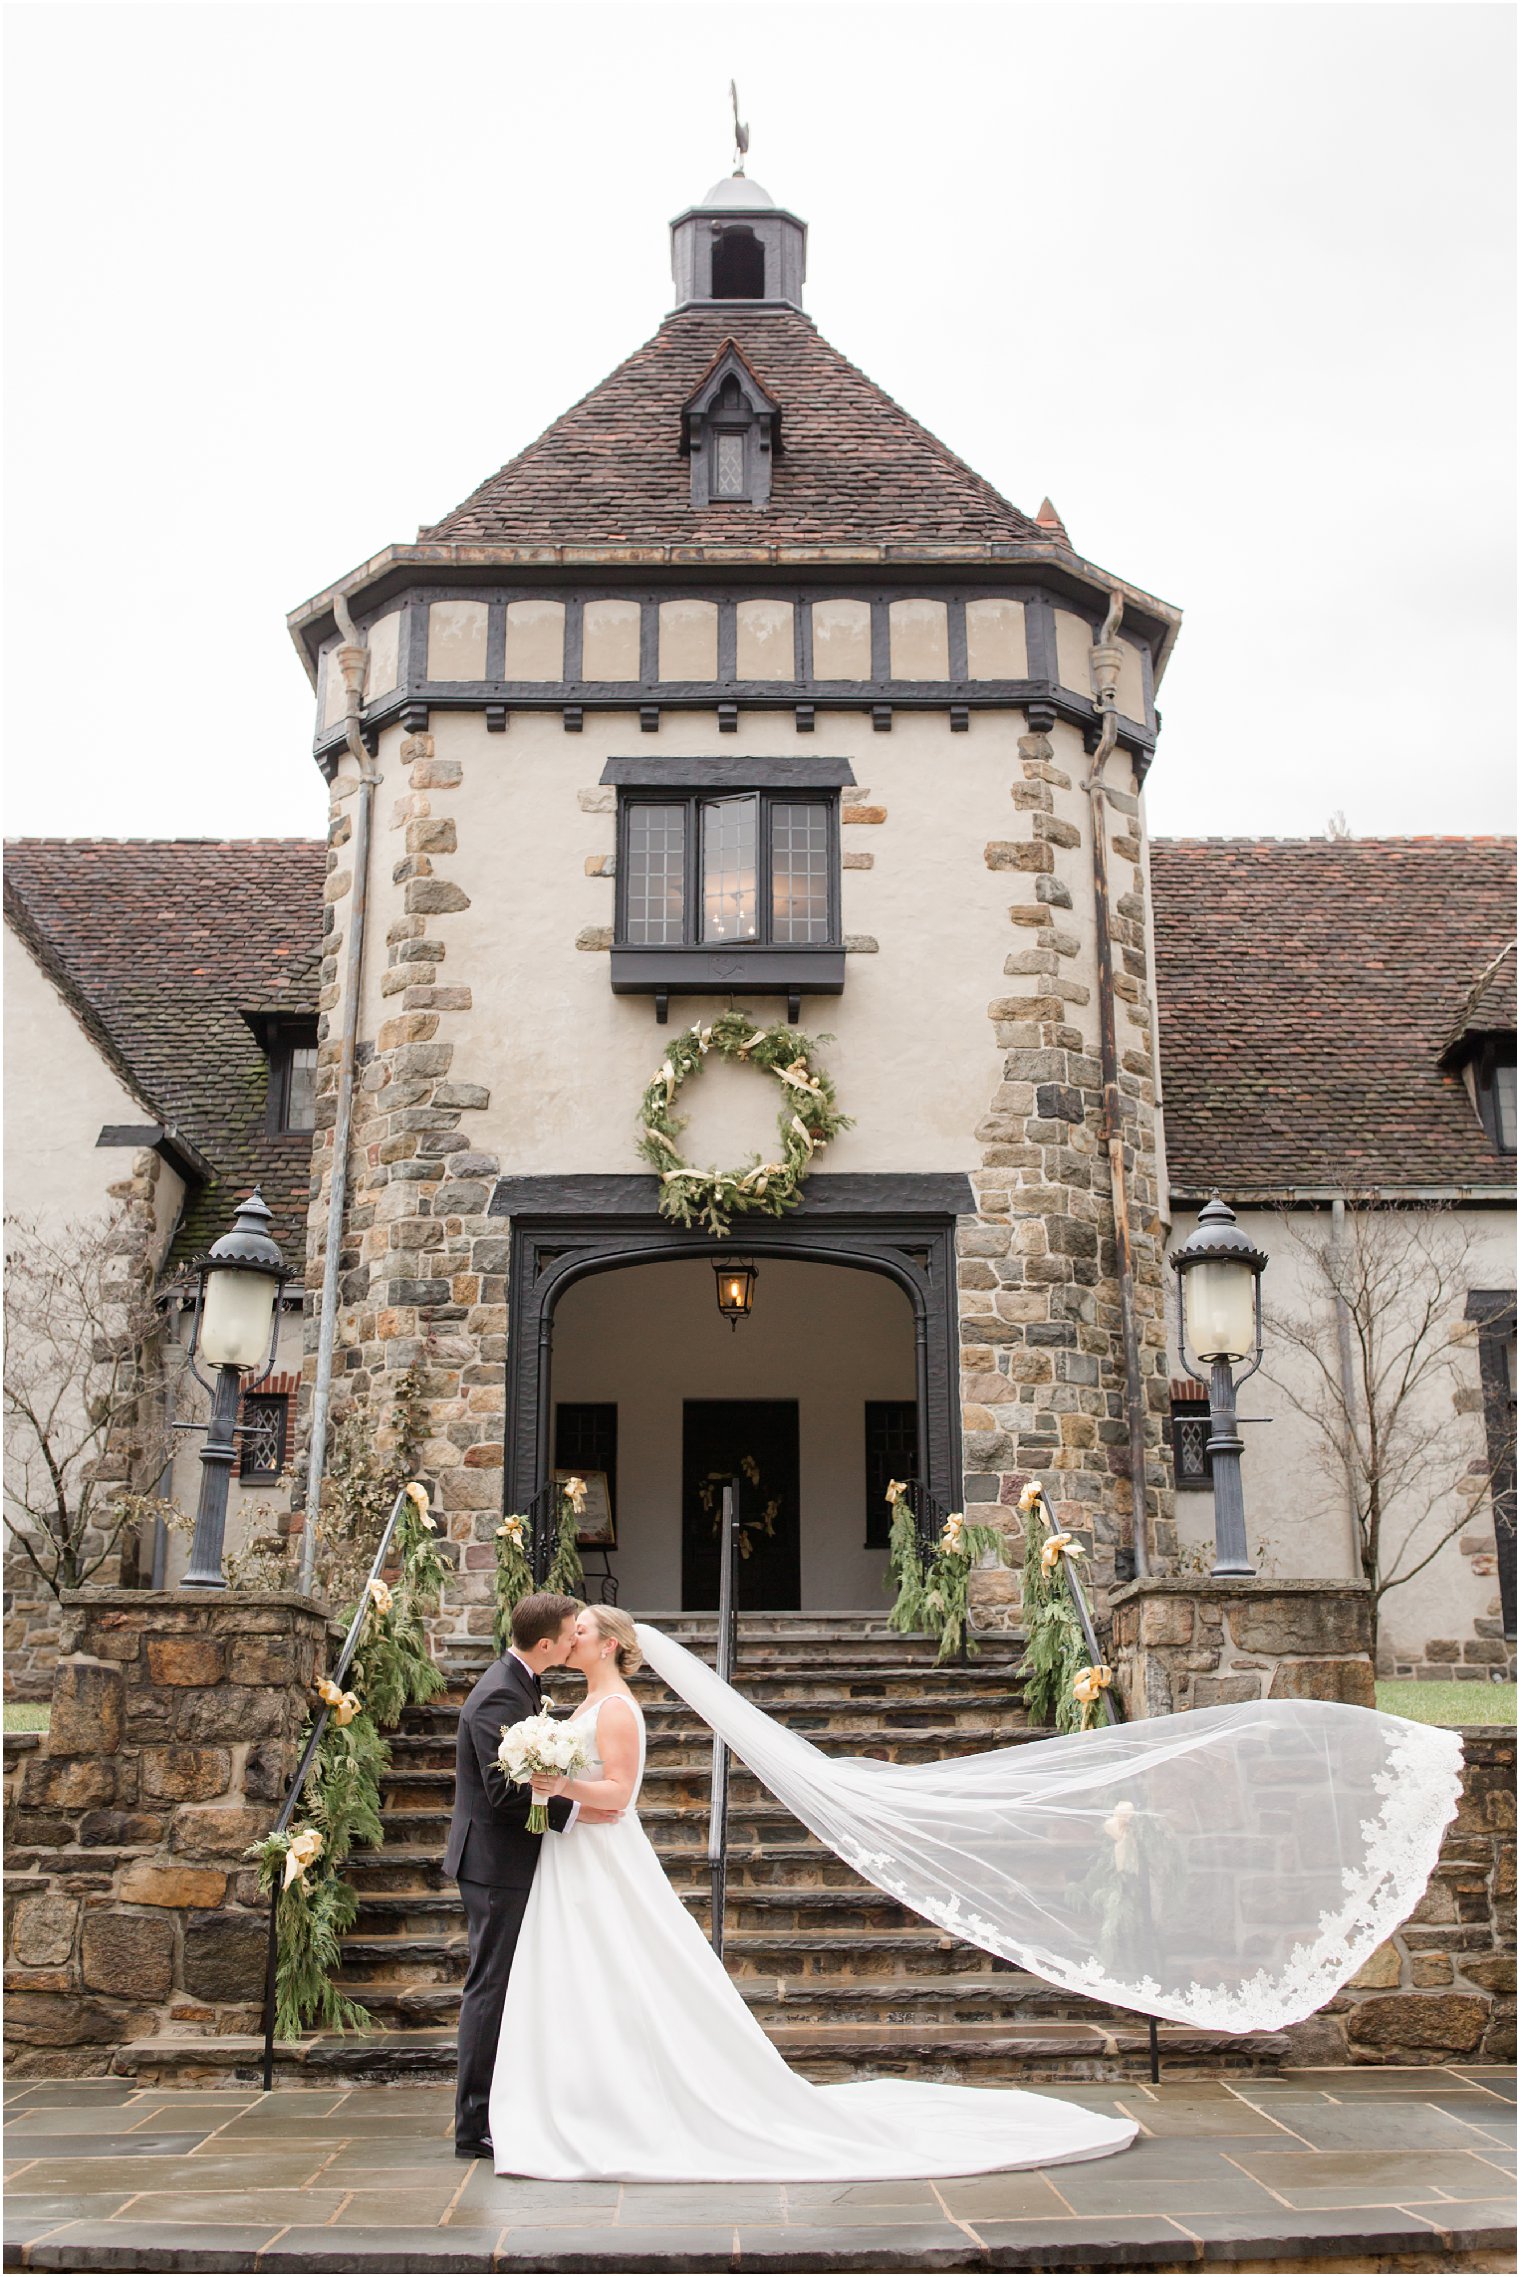 romantic floating veil photo at Pleasantdale Chateau